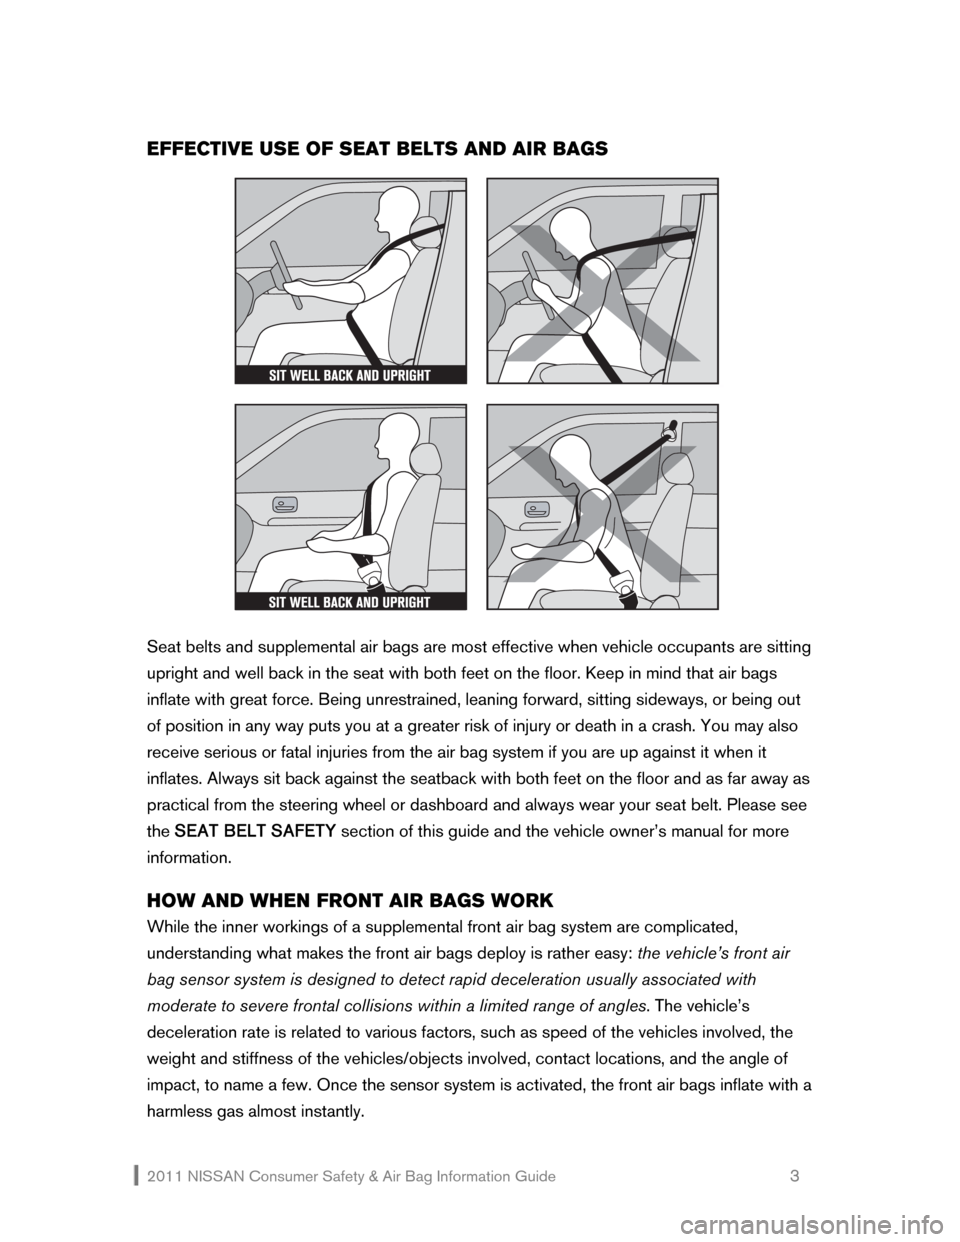 NISSAN SENTRA 2011 B16 / 6.G Consumer Safety Air Bag Information Guide 2011 NISSAN Consumer Safety & Air Bag Information Guide                                                       3 
EFFECTIVE USE OF SEAT BELTS AND AIR BAGS 
 
 
 
Seat belts and supplemental air bags ar